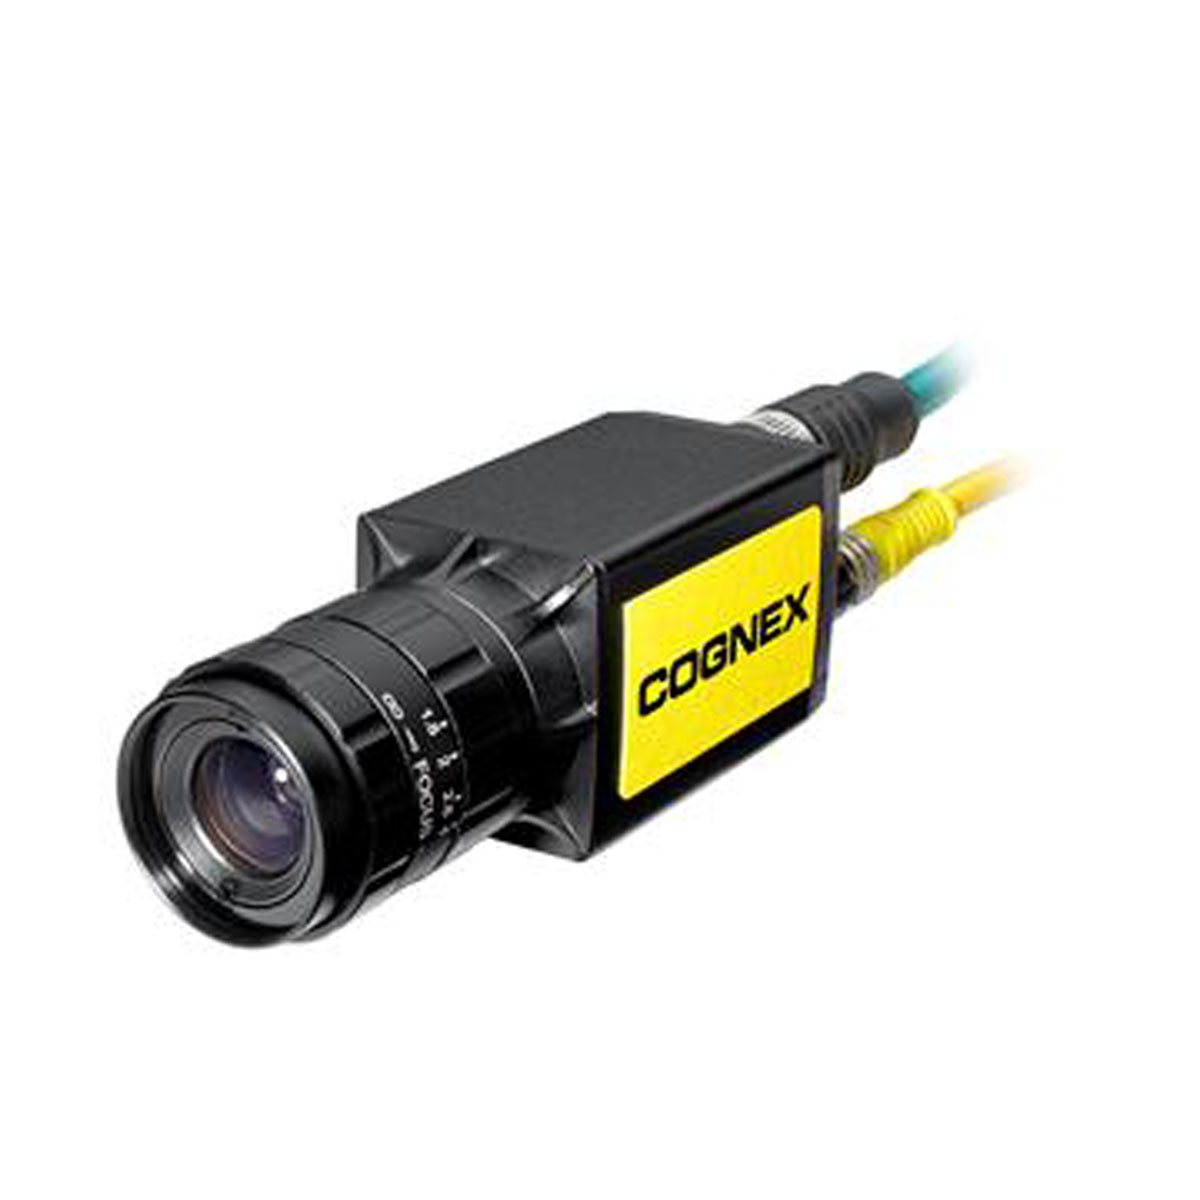 IS8500MP-363-50 COGNEX IS8500MP Low resolution Kit